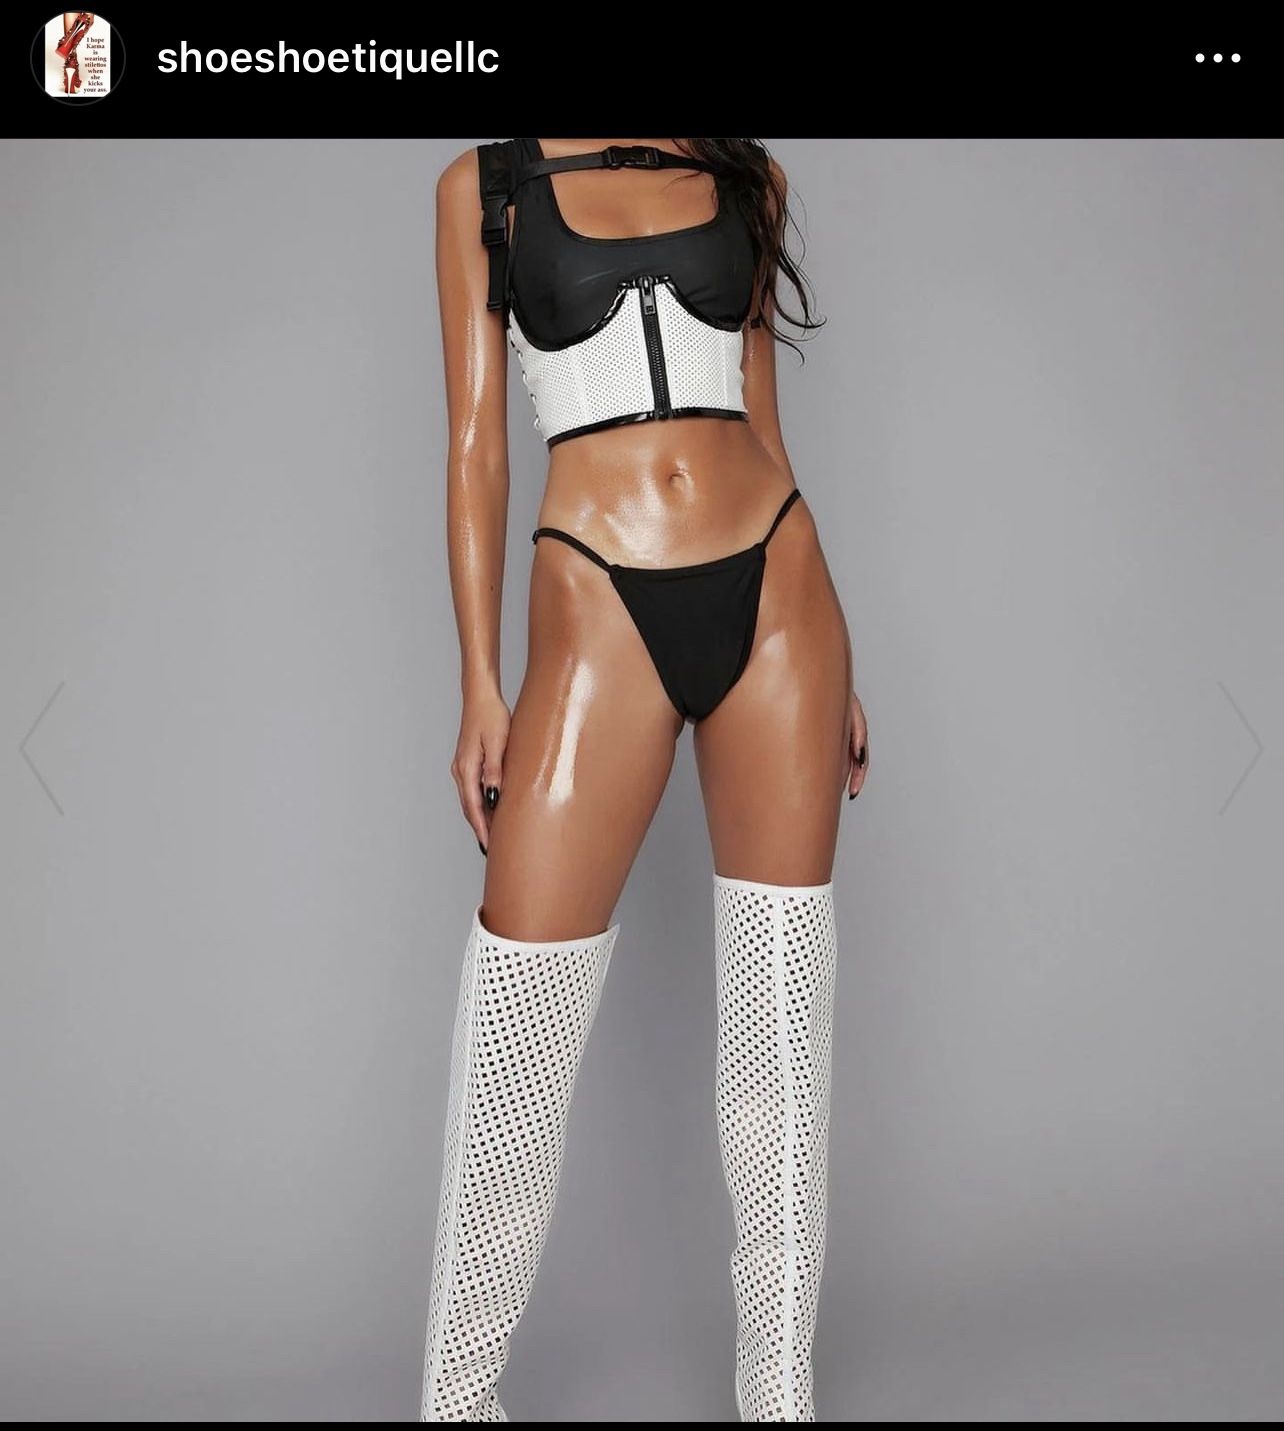 Caged thigh high boots